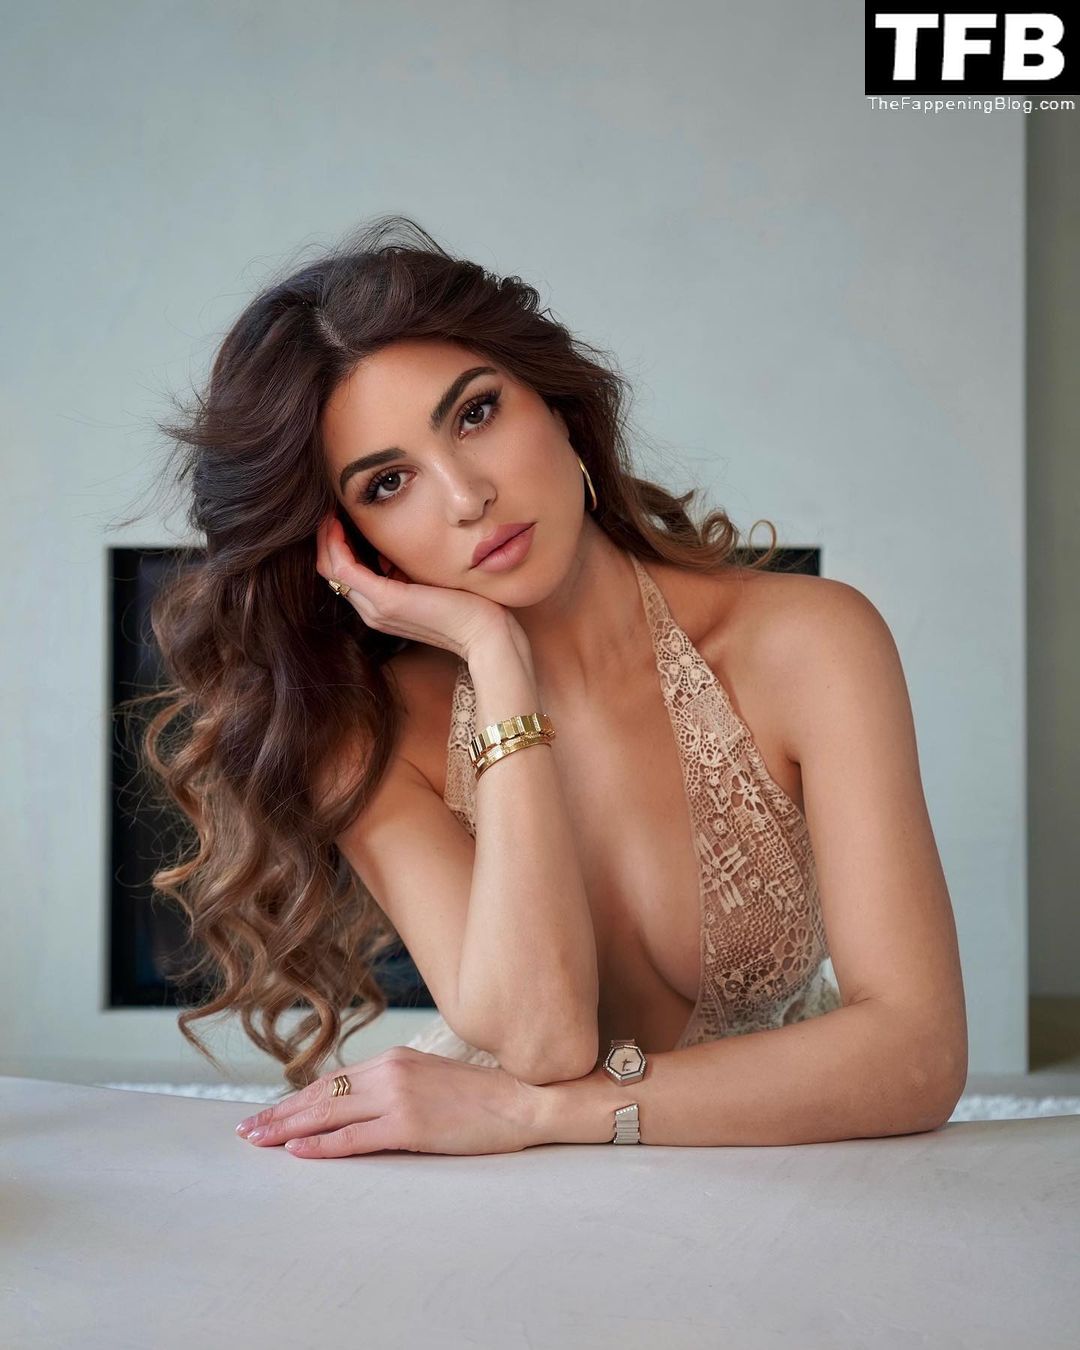 Negin-Mirsalehi-Nude-Sexy-Collection-The-Fappening-Blog-22.jpg